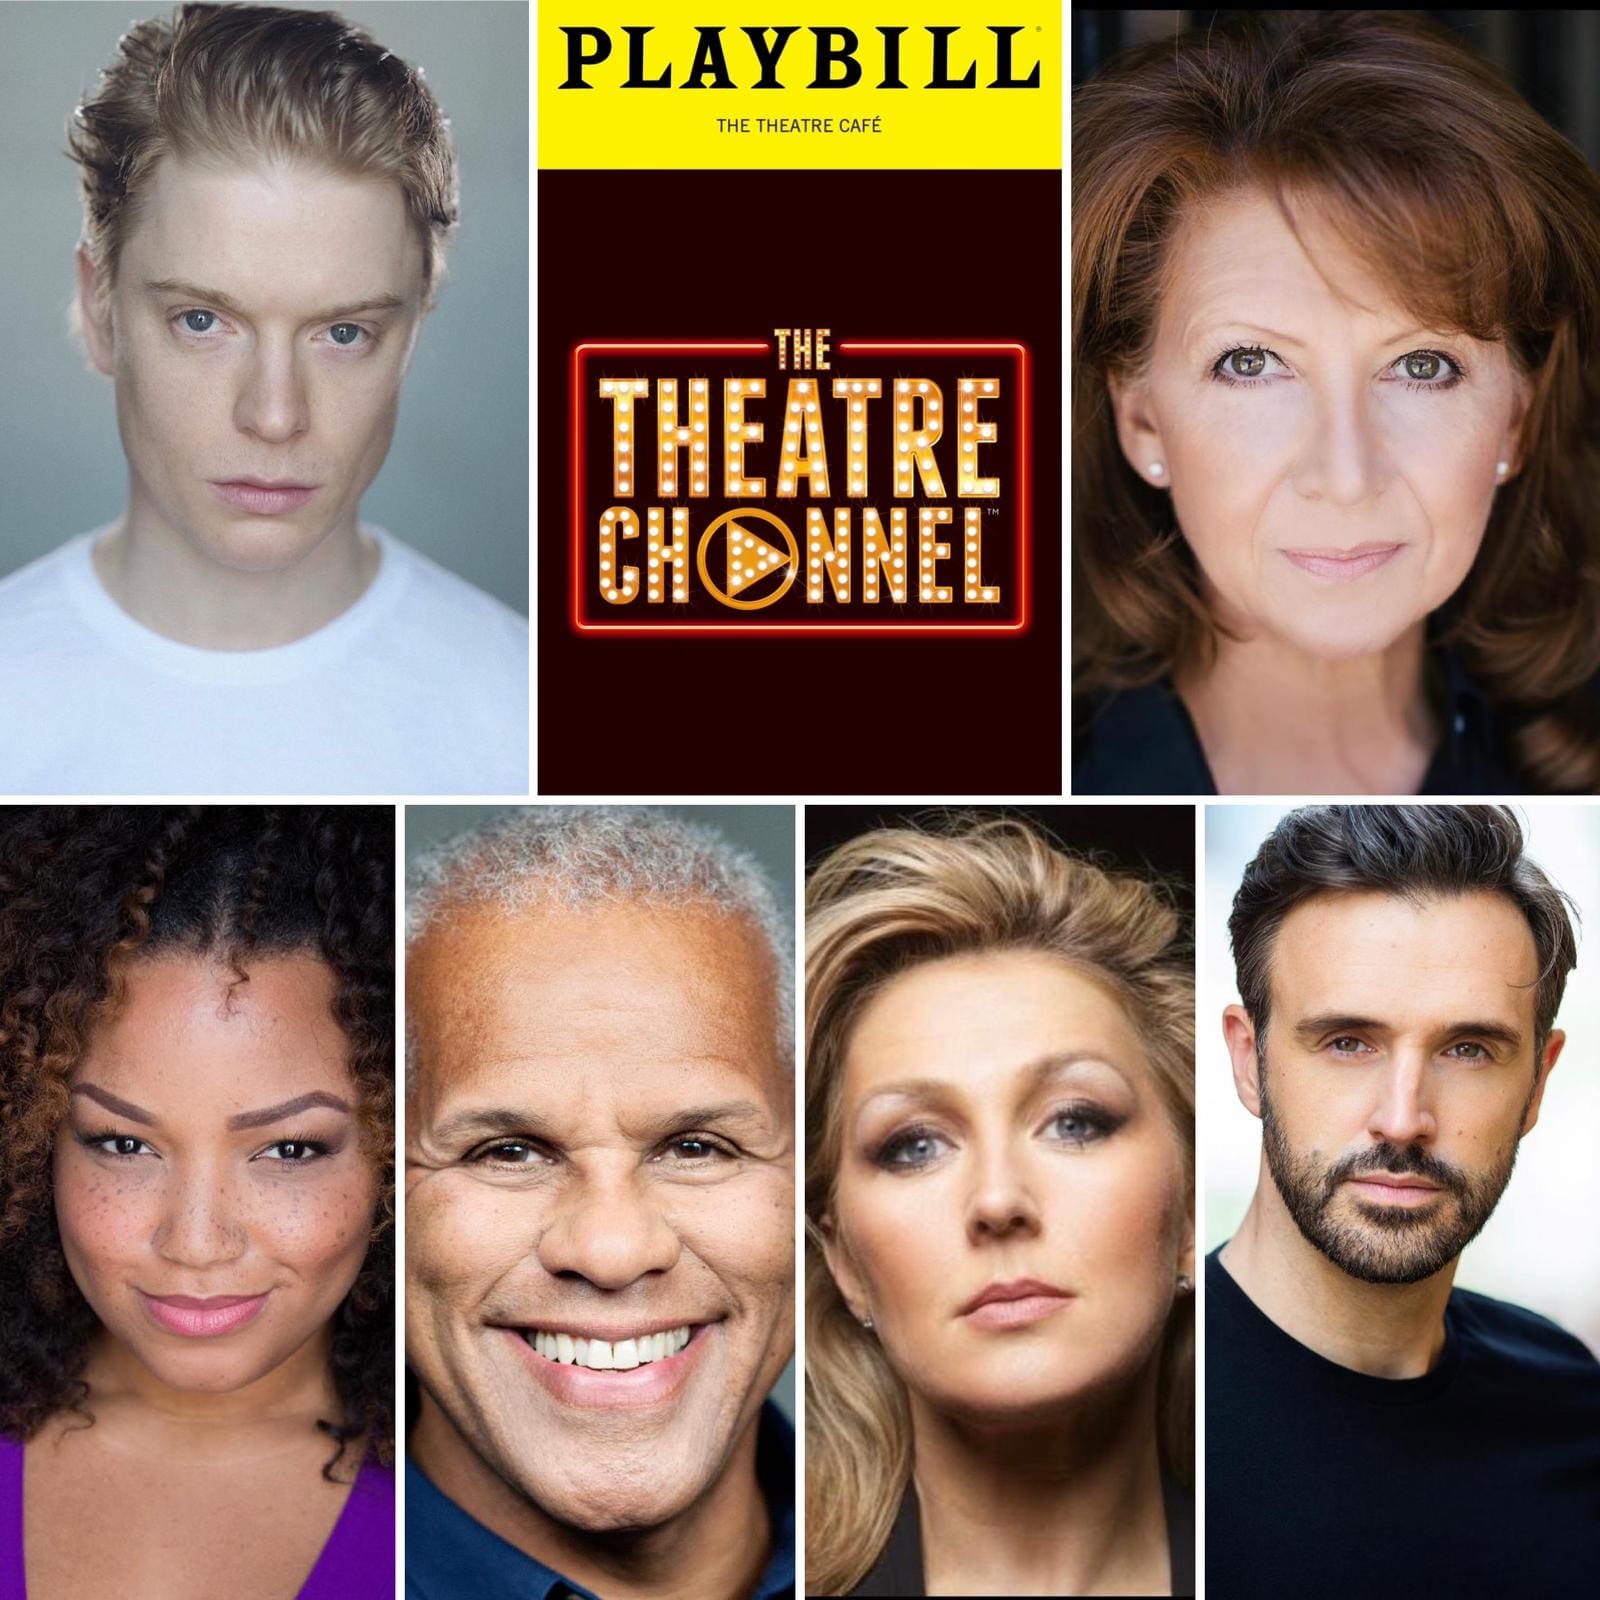 News: The Theatre Channel announce date and cast for Episode 5 – The Golden Era of Broadway